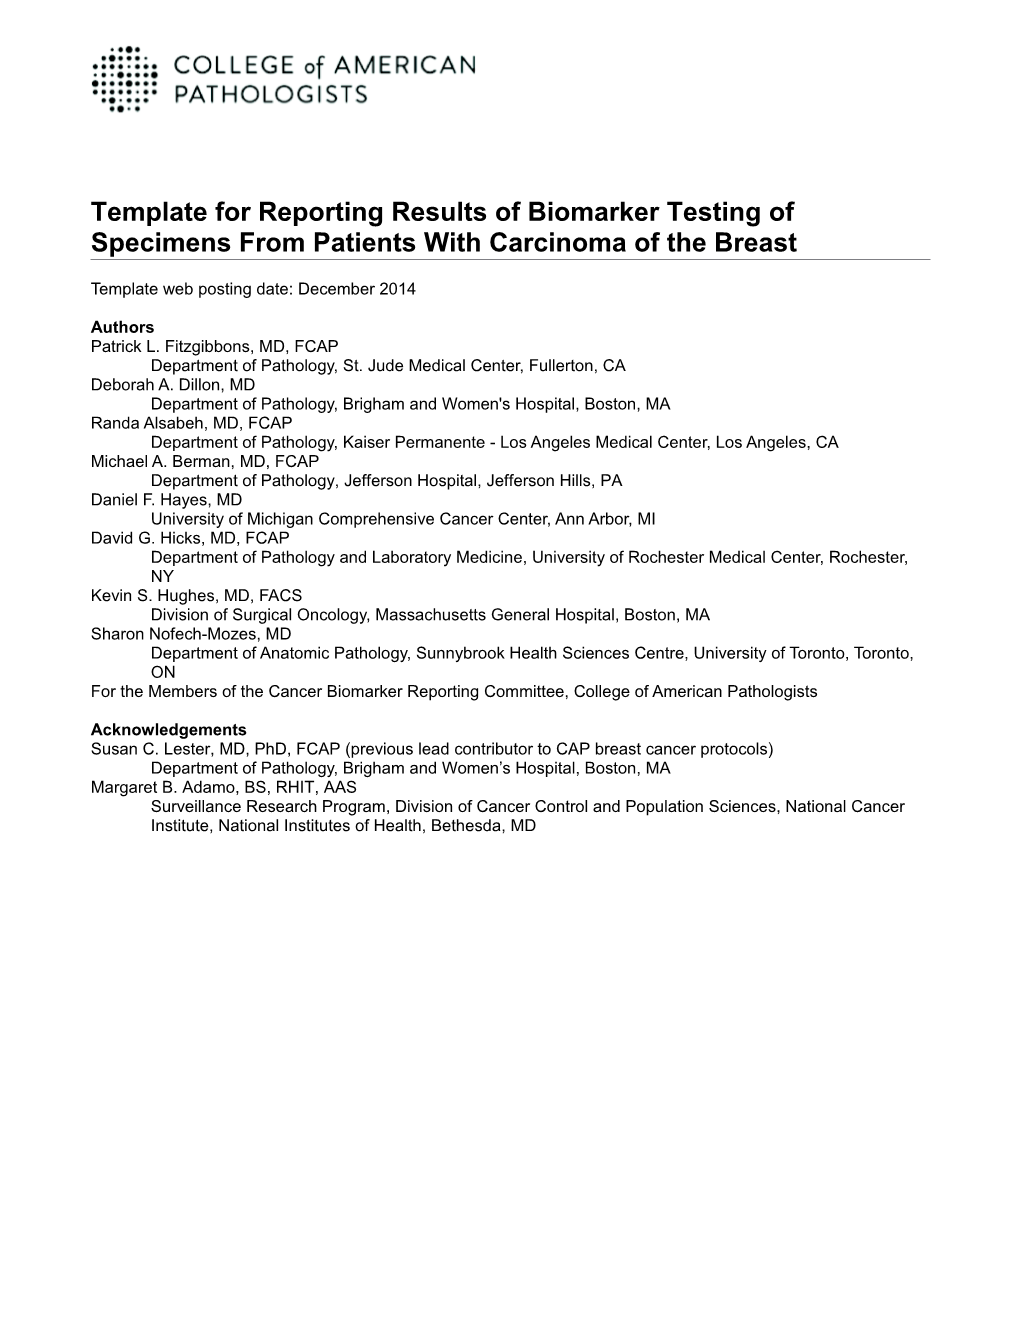 Template for Reporting Results of Biomarker Testing of Specimens from Patients with Carcinoma